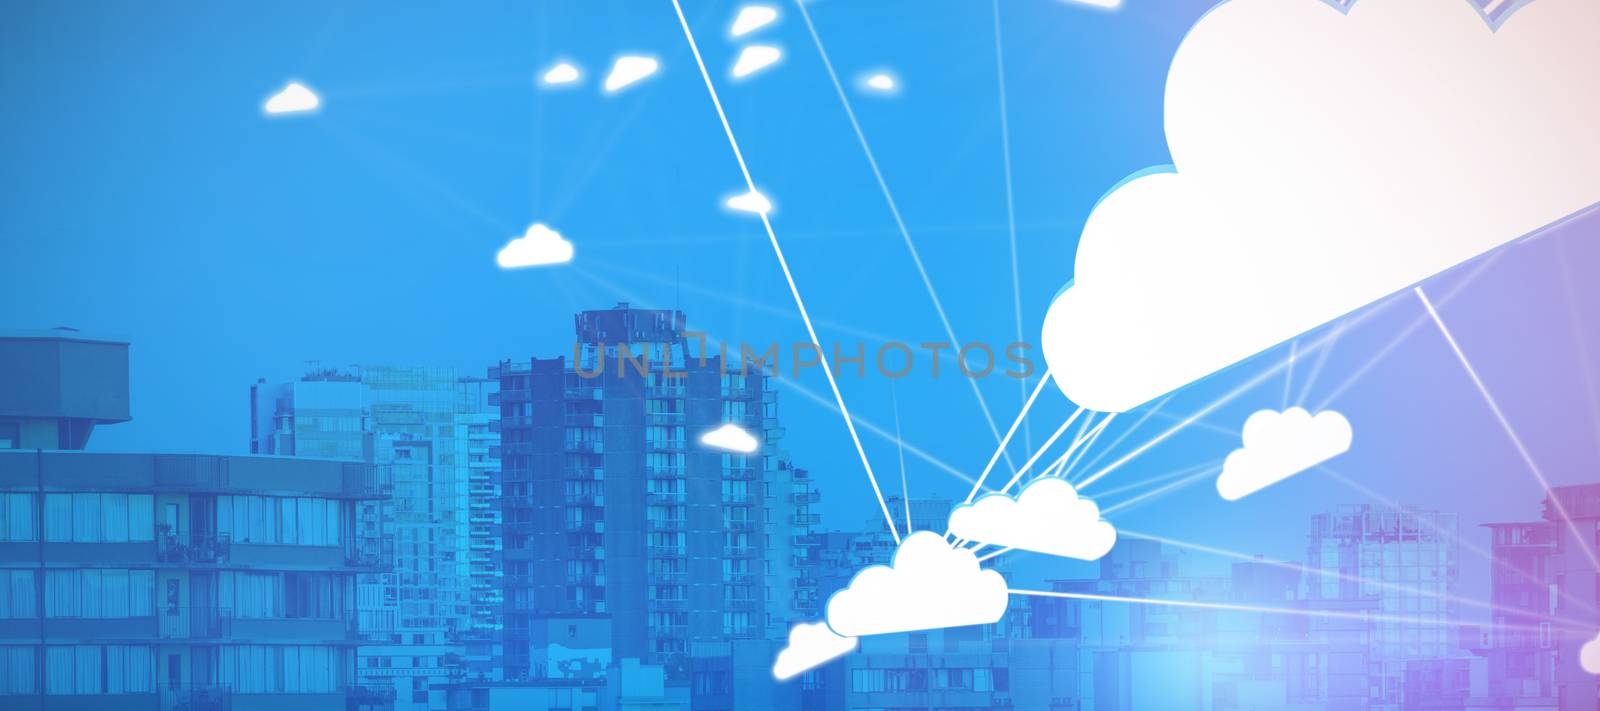 Abstract image of cloud computing symbol against buildings in city during sunset